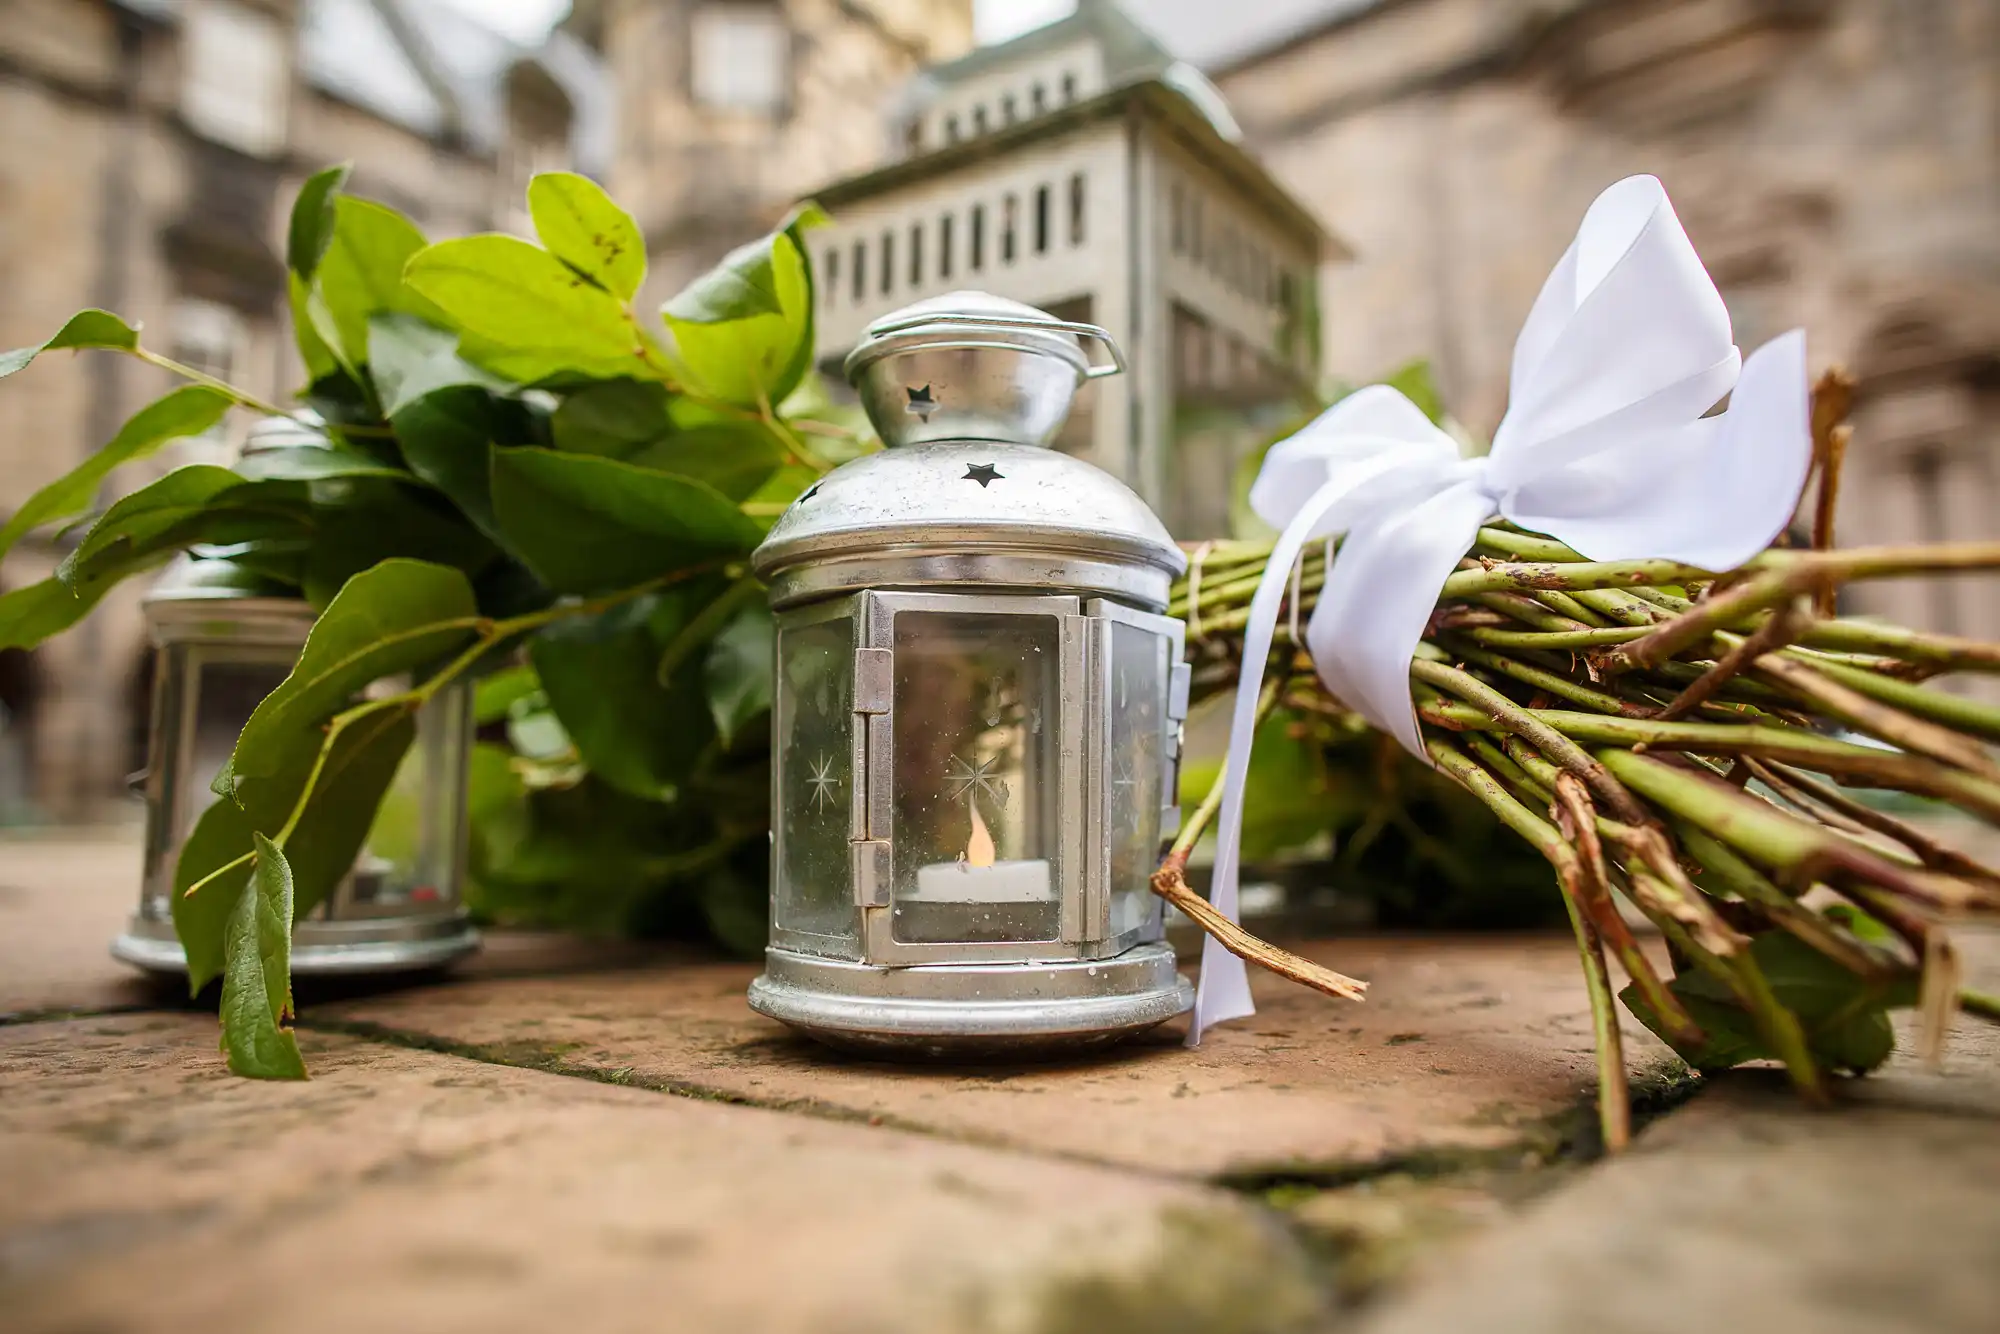 A metal lantern with a lit candle inside, surrounded by green leaves and a white bow, placed on a cobblestone surface.